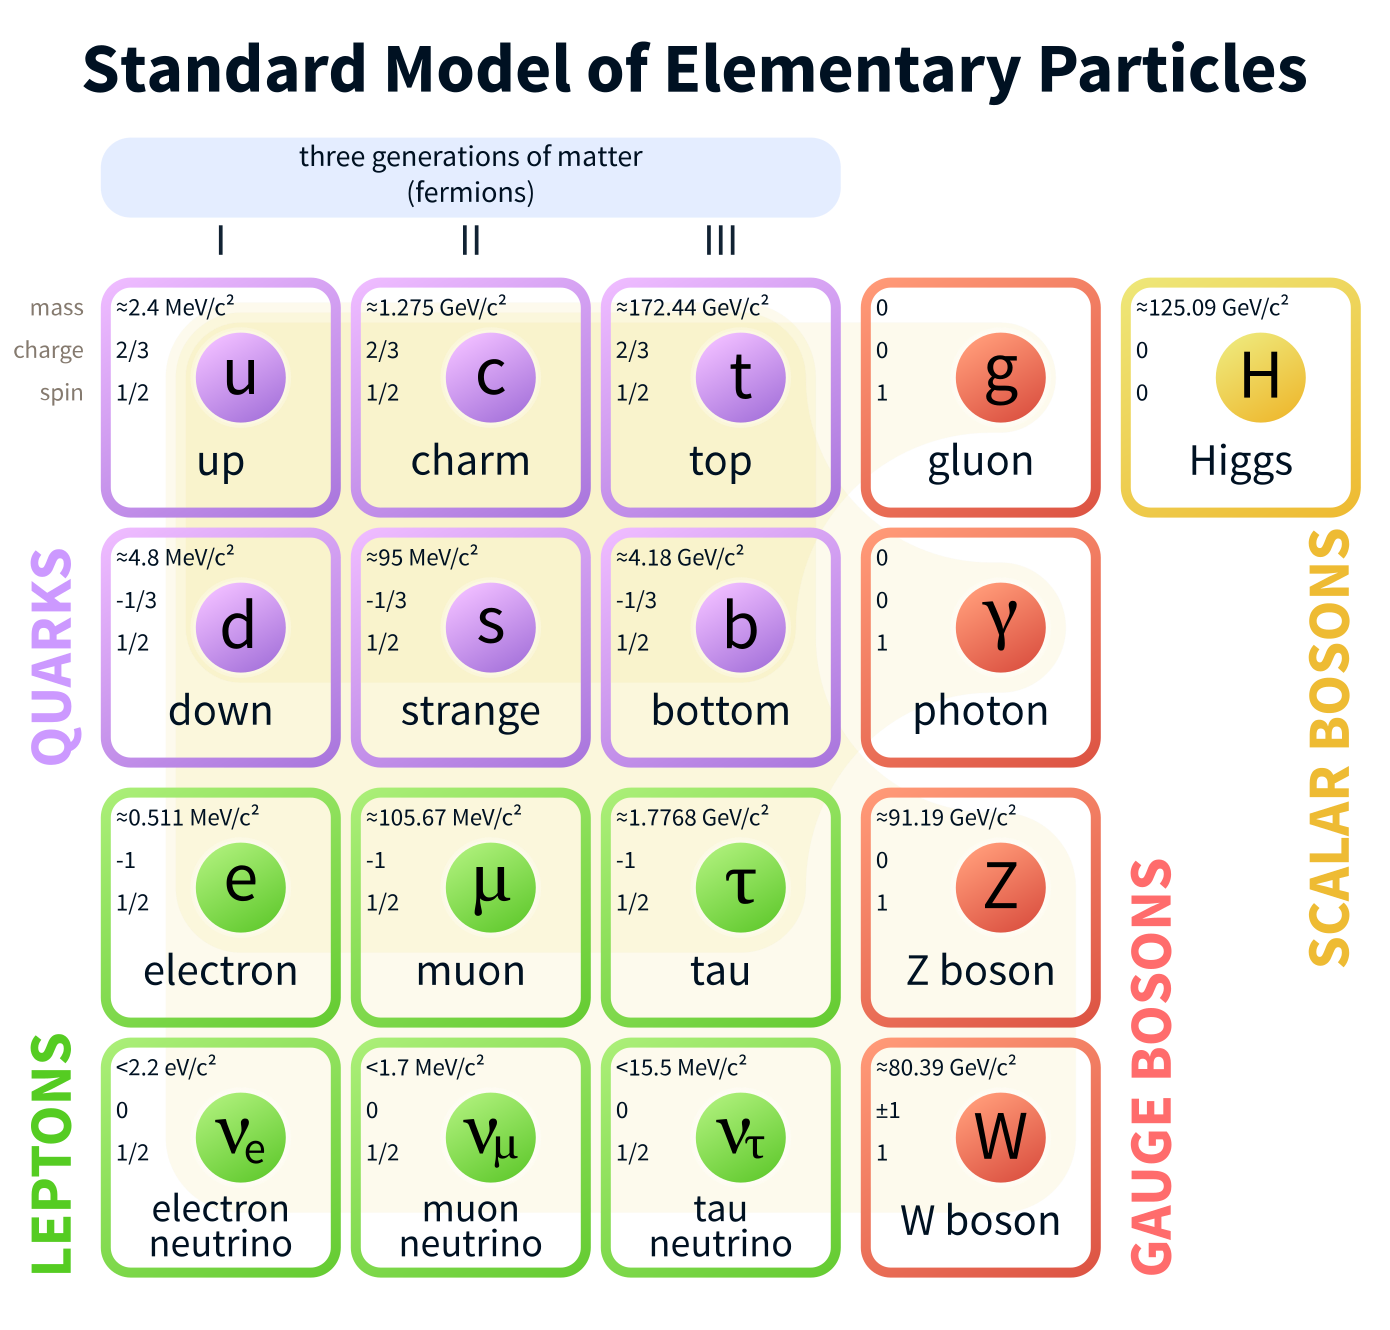 Attachment 1390px-Standard_Model_of_Elementary_Particles.svg.png